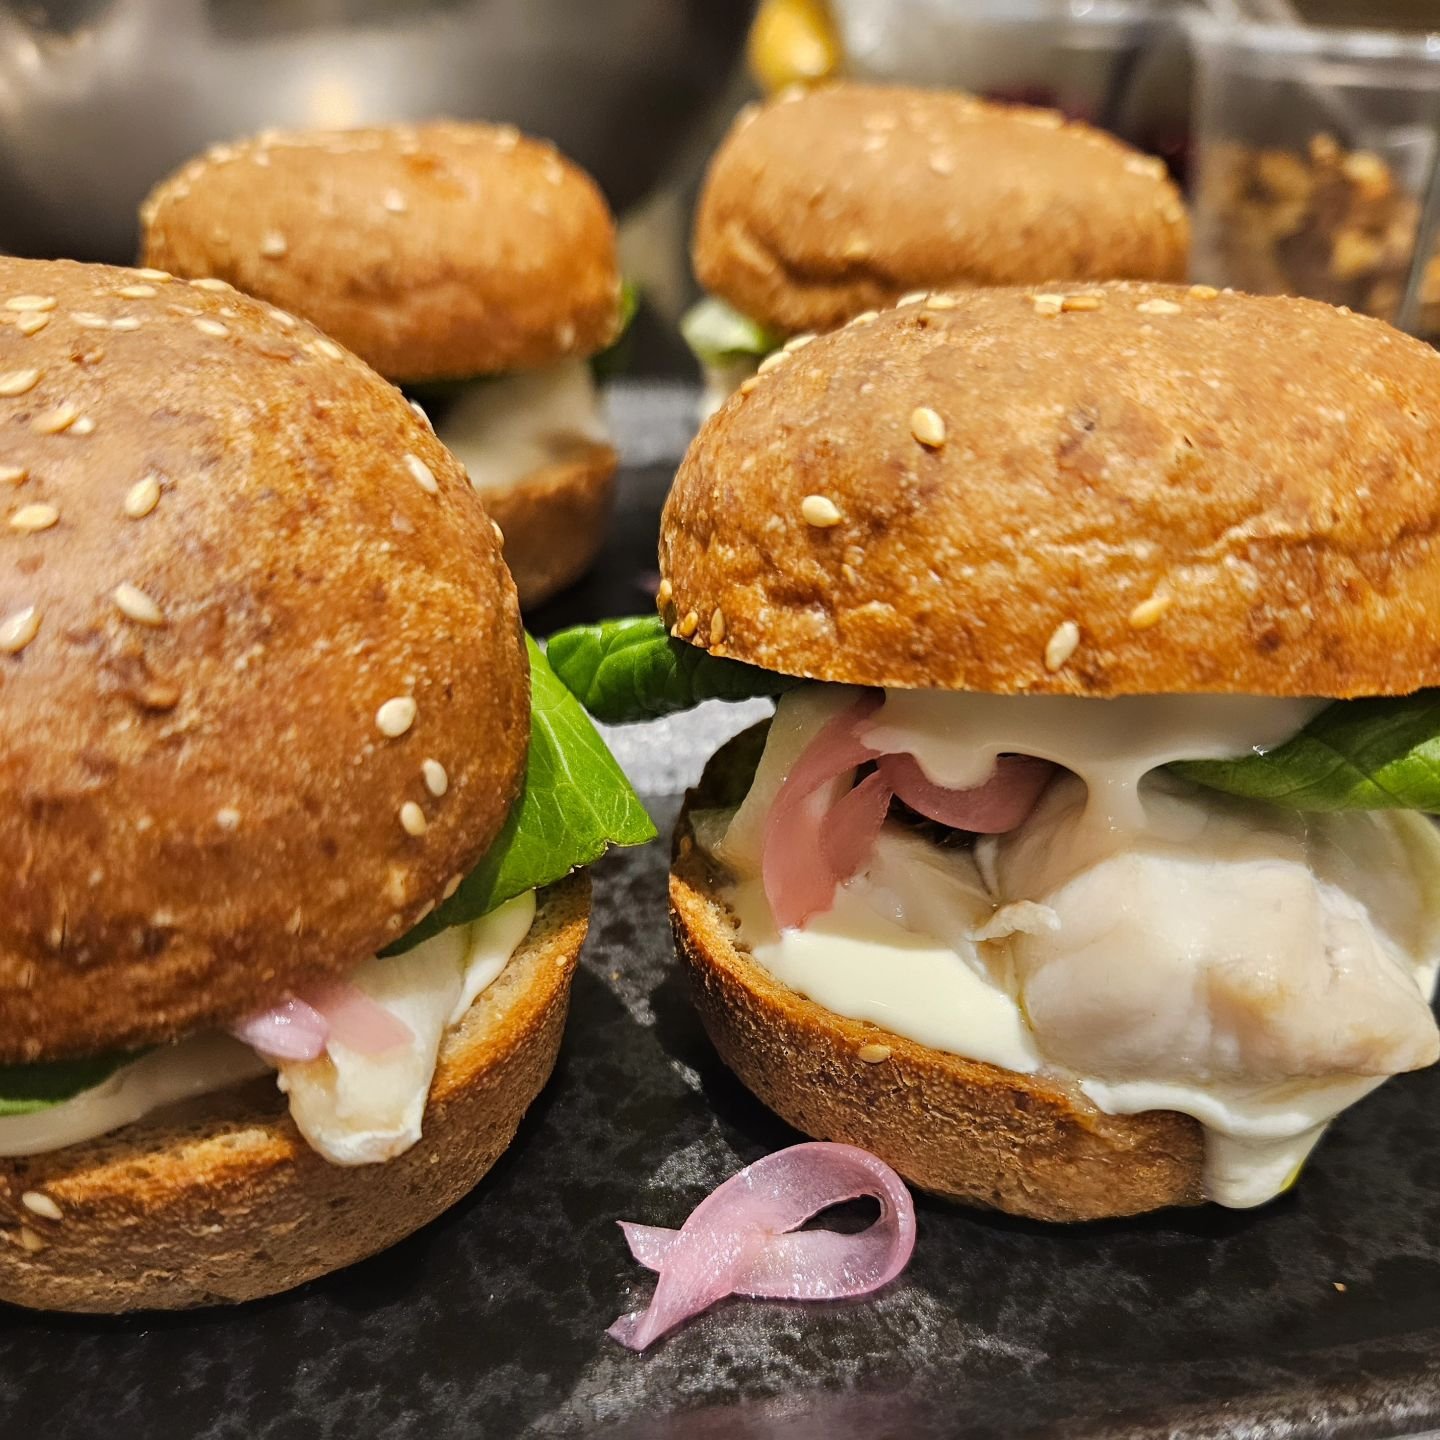 Fish Sliders were a hit over the weekend! So they are coming back with a vengeance this week.

Baked fish with lemon oil &amp; salt, lemon mayo, popped capers, pickled onion &amp; lettuce. All nestled in between the gloriously soft @thoroughbreadfood